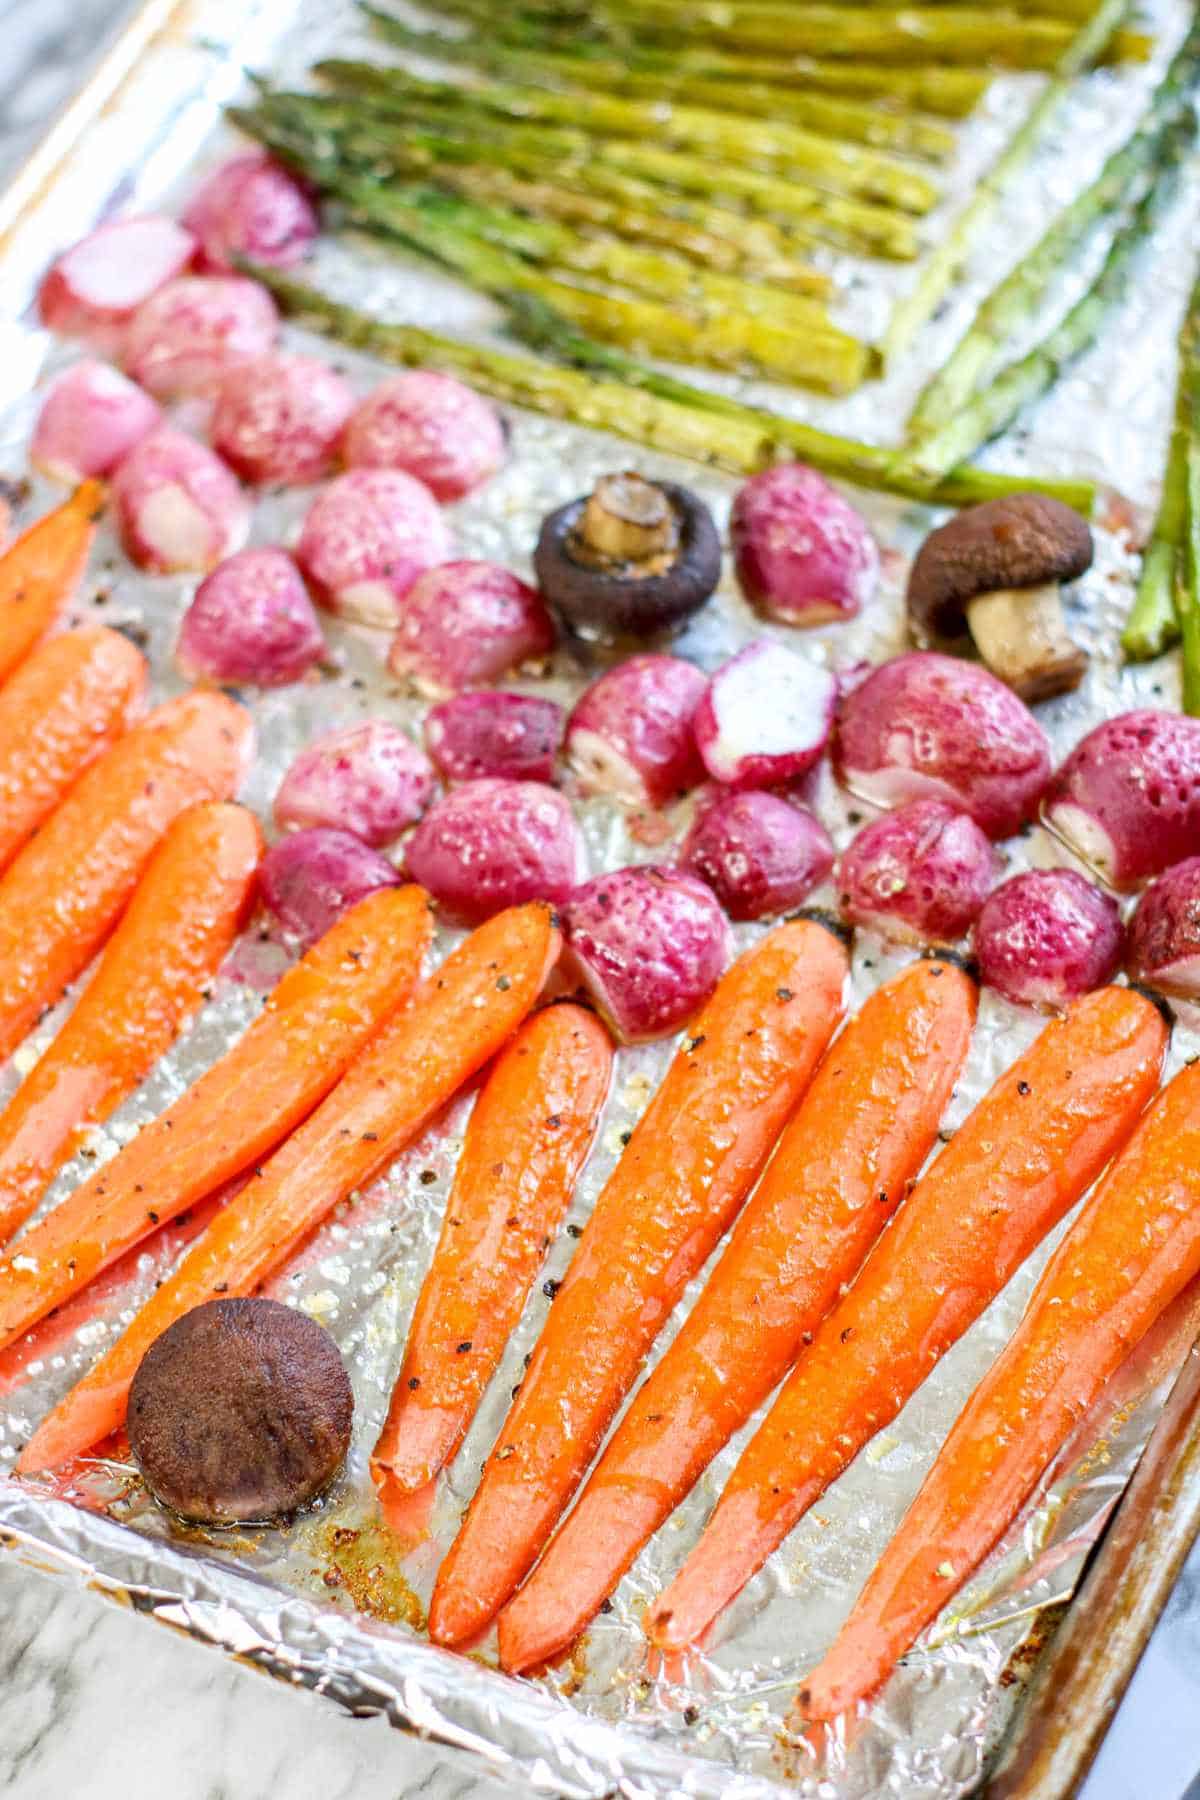 sheet pans of cooked carrots, radish, and asparagus.